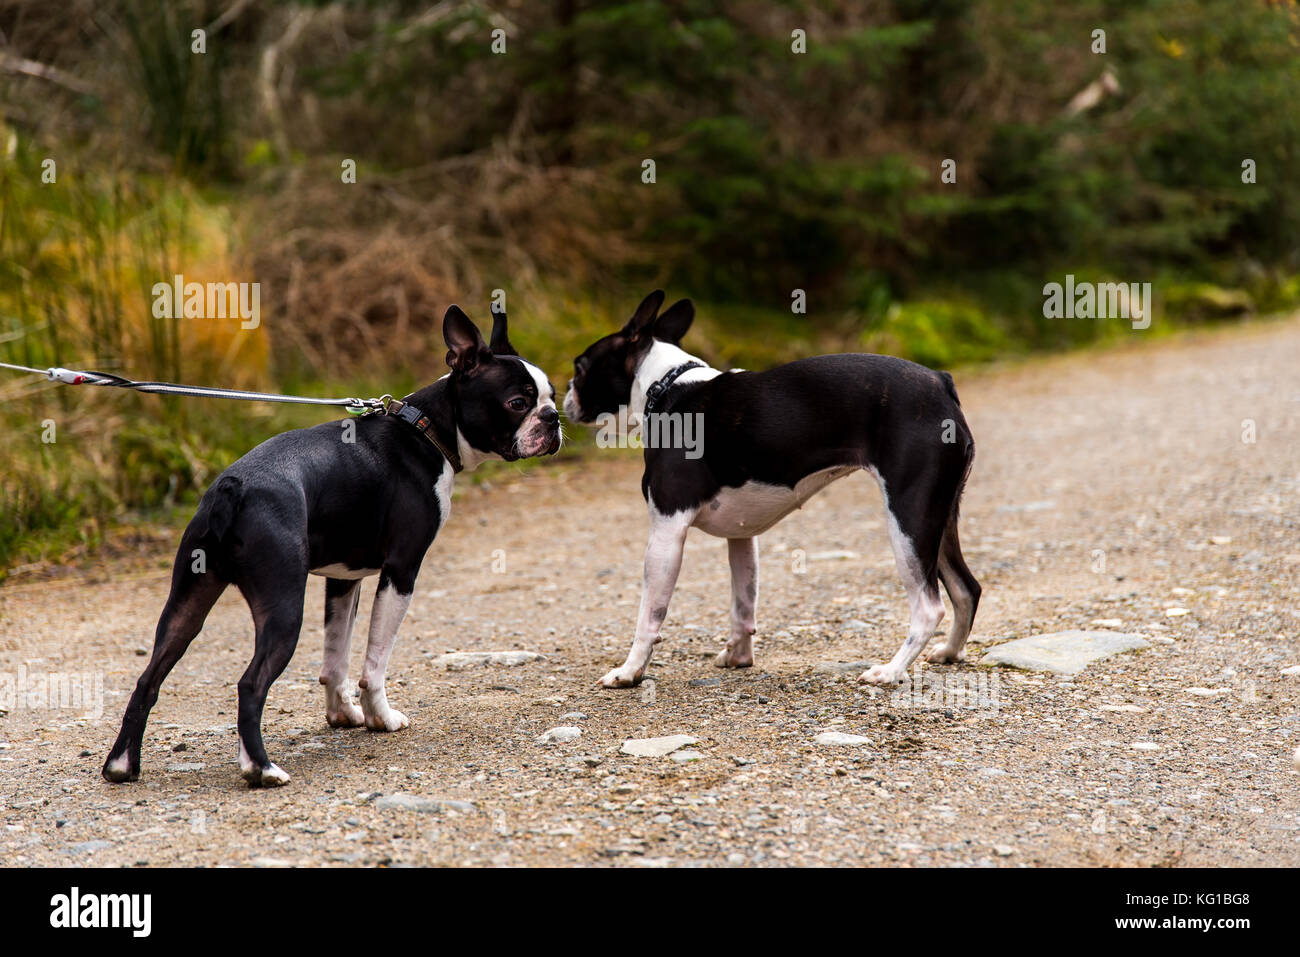 Dog on a walk in a picturesque setting Stock Photo